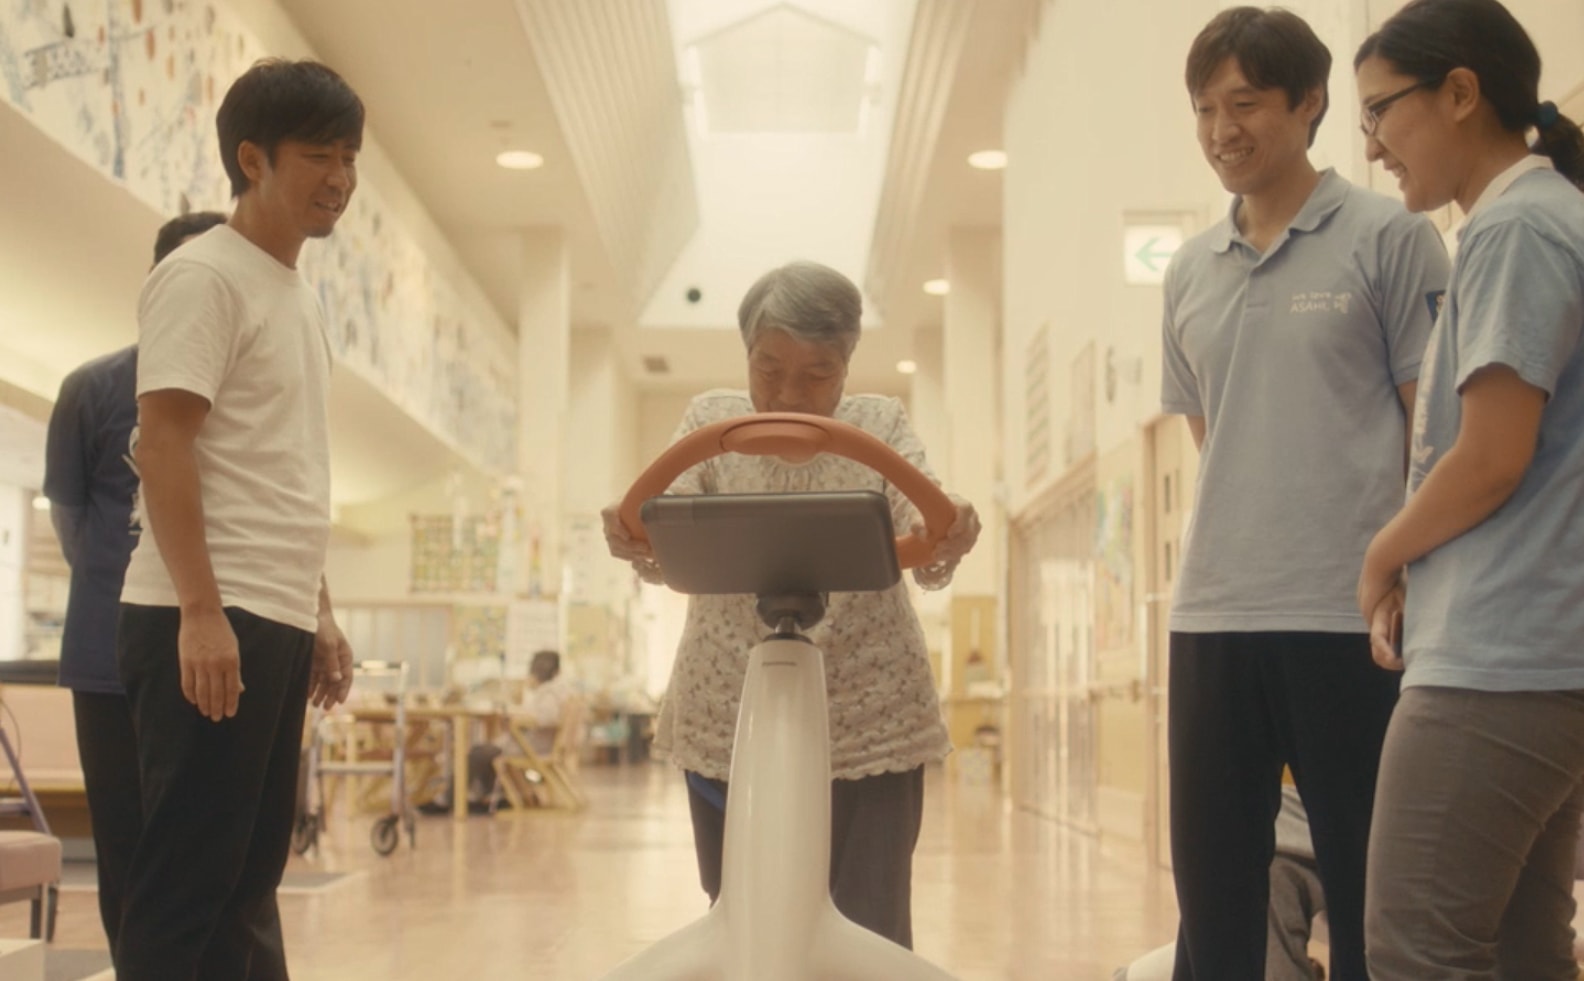 Photo: Elderly person training with the walking training robot